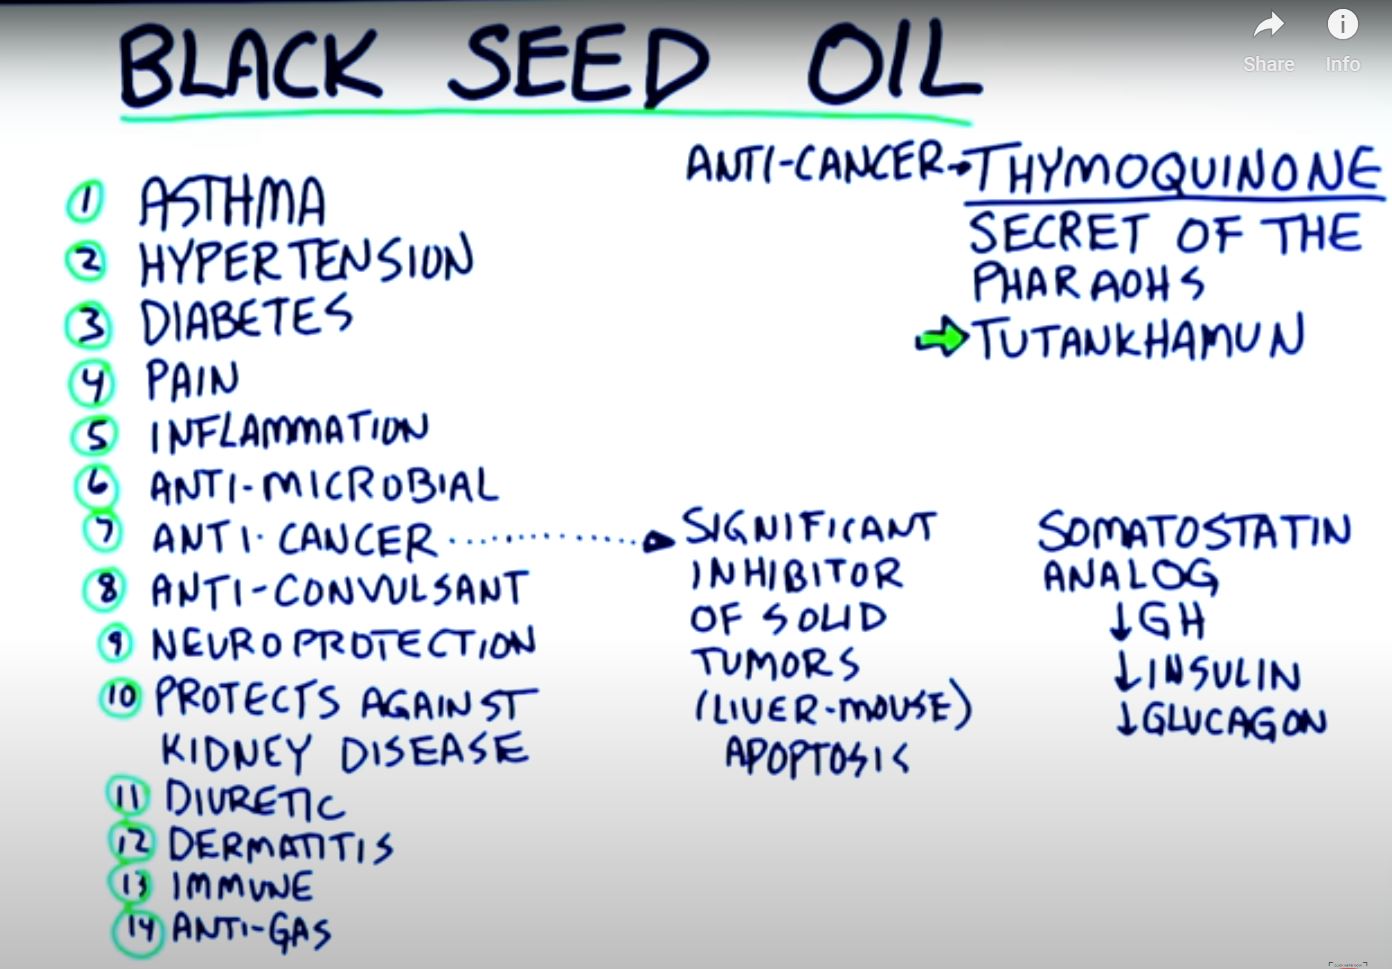 Black seed oil benefits and properties